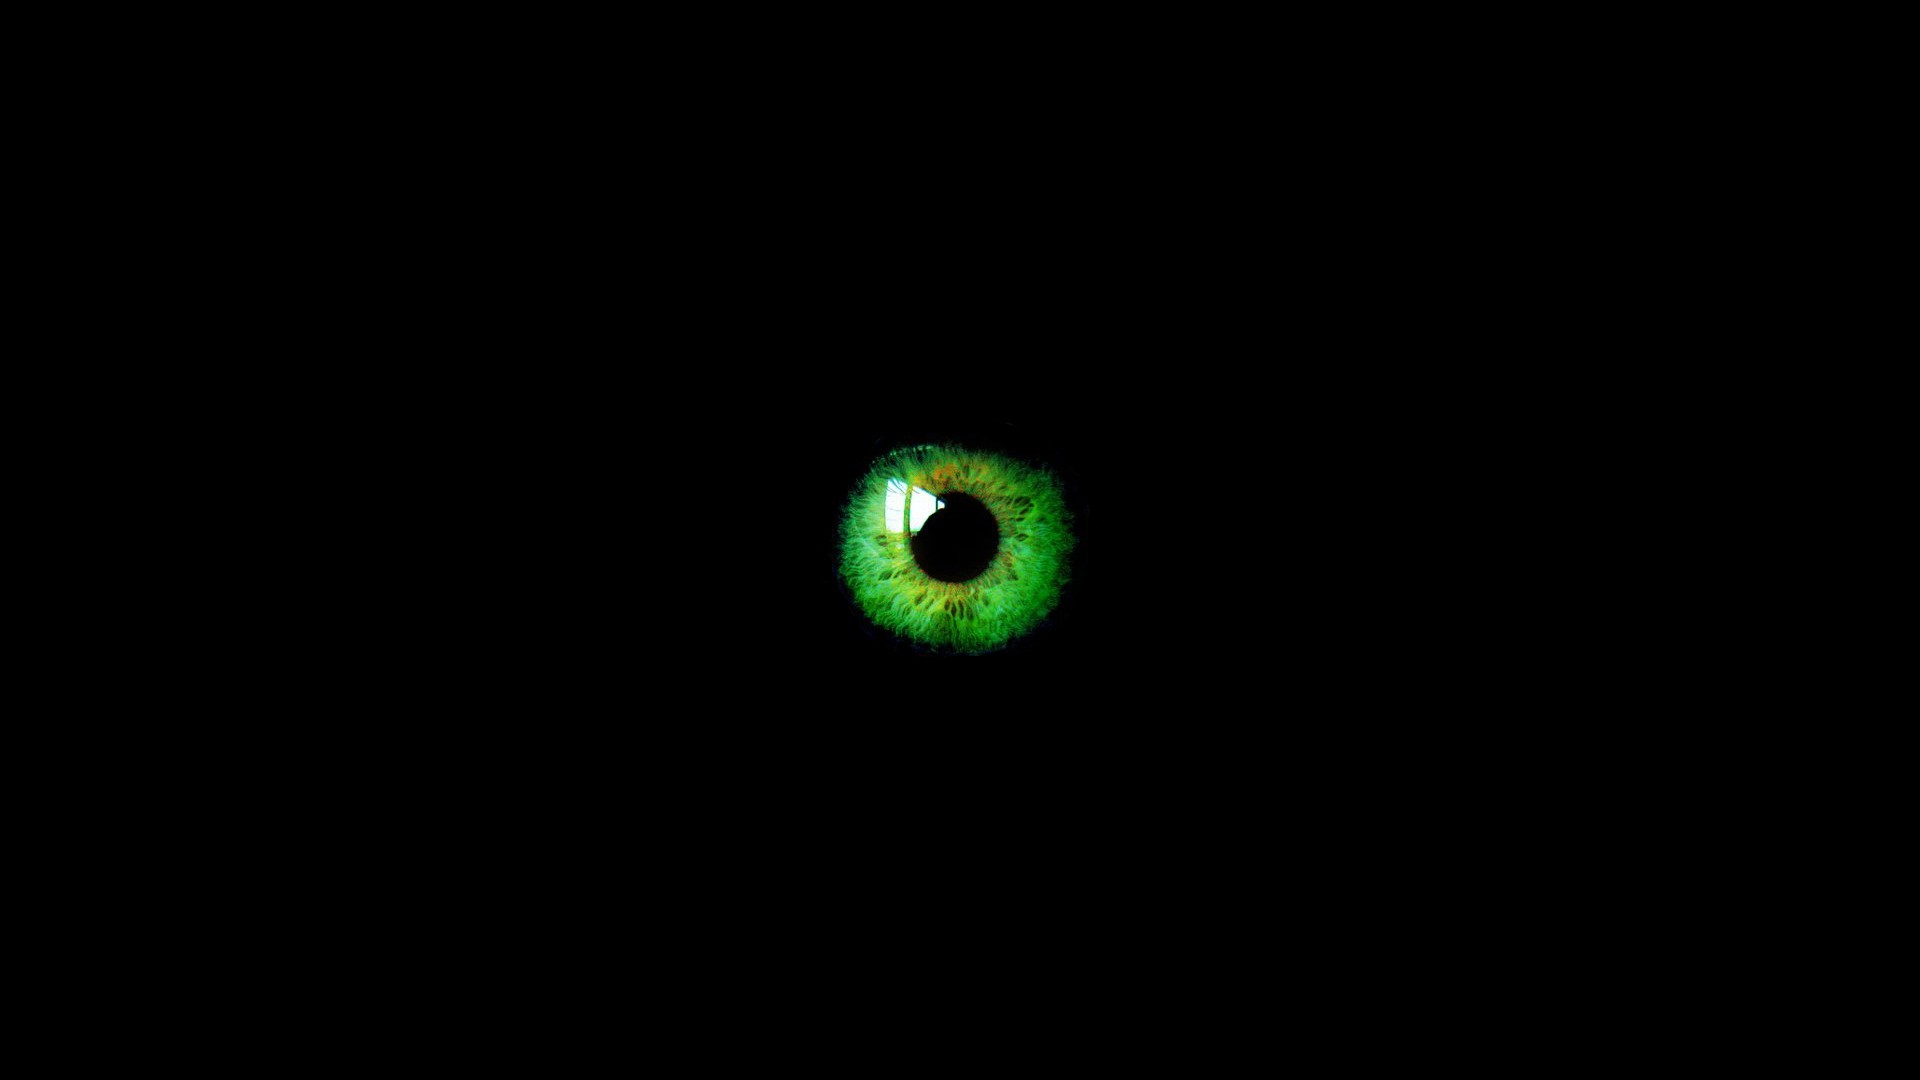 background backgrounds wallpapers eyes black images green eye